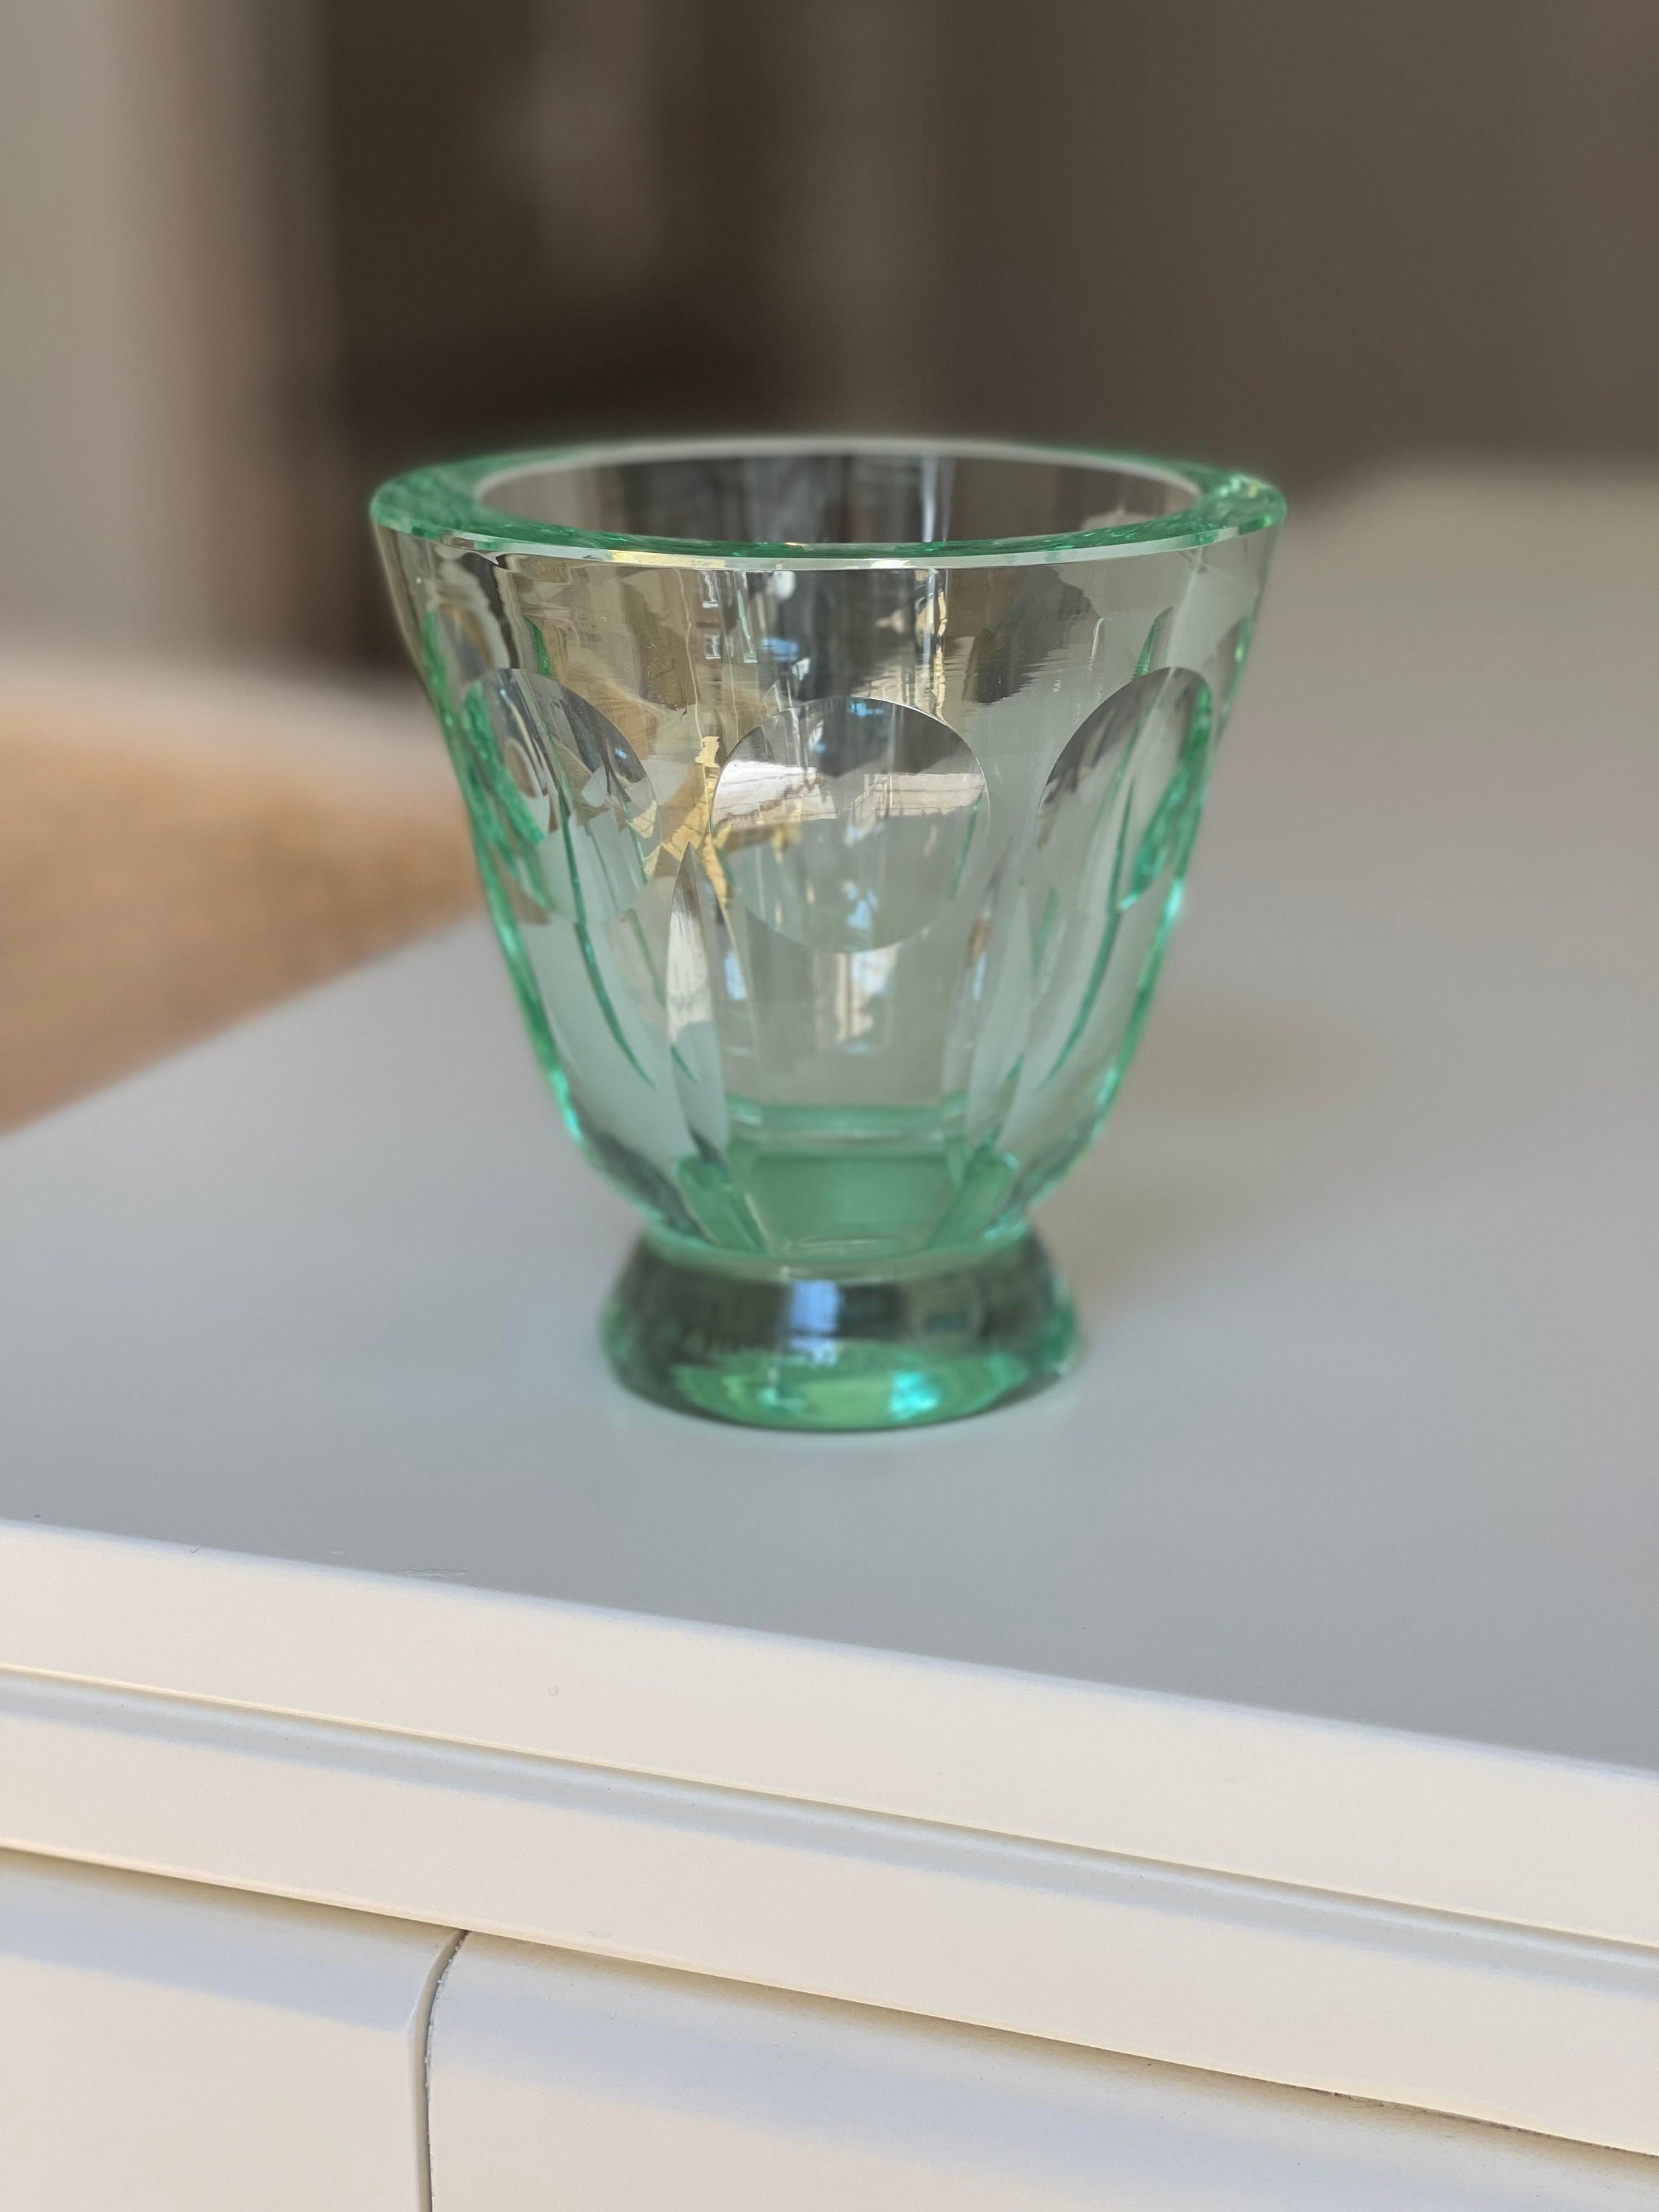 1930s Daum etched green glass cocktail jug and glasses